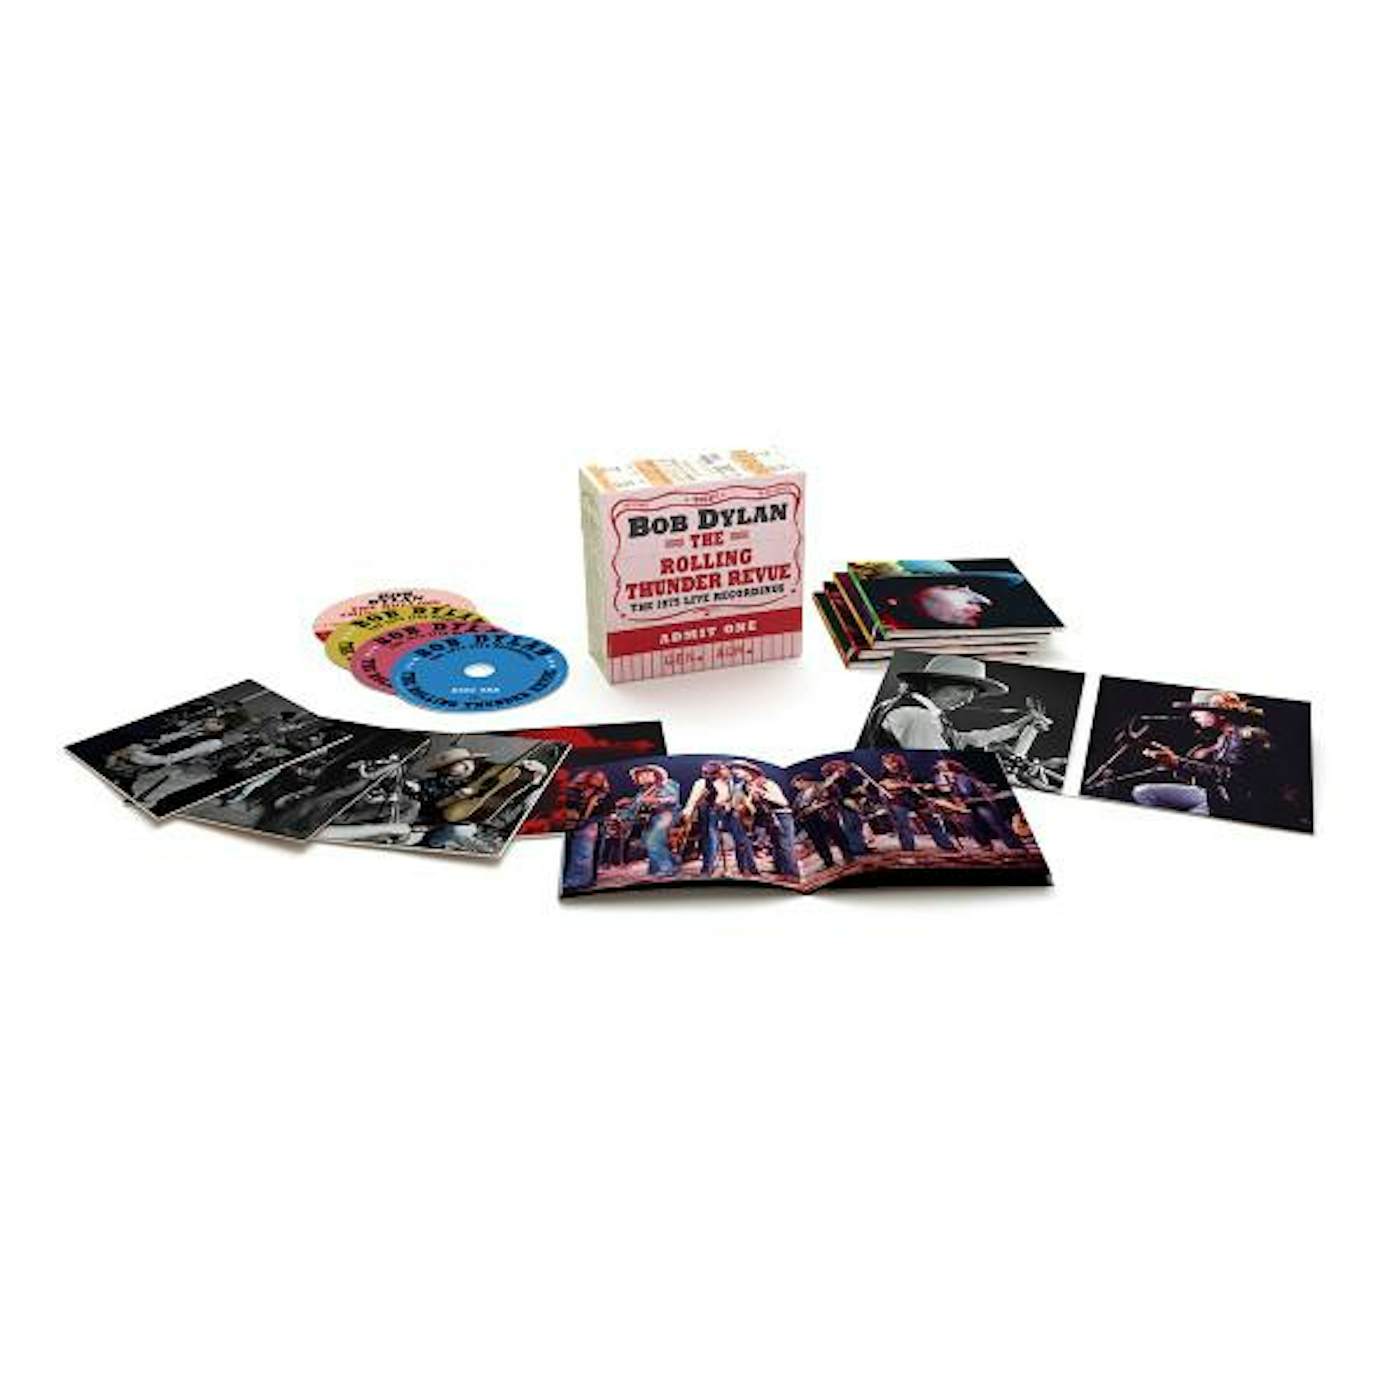 Bob Dylan The Rolling Thunder Revue: The 1975 Live Recordings - Deluxe 14CD Box Set Ultimate Bundle - Limited Quantity!